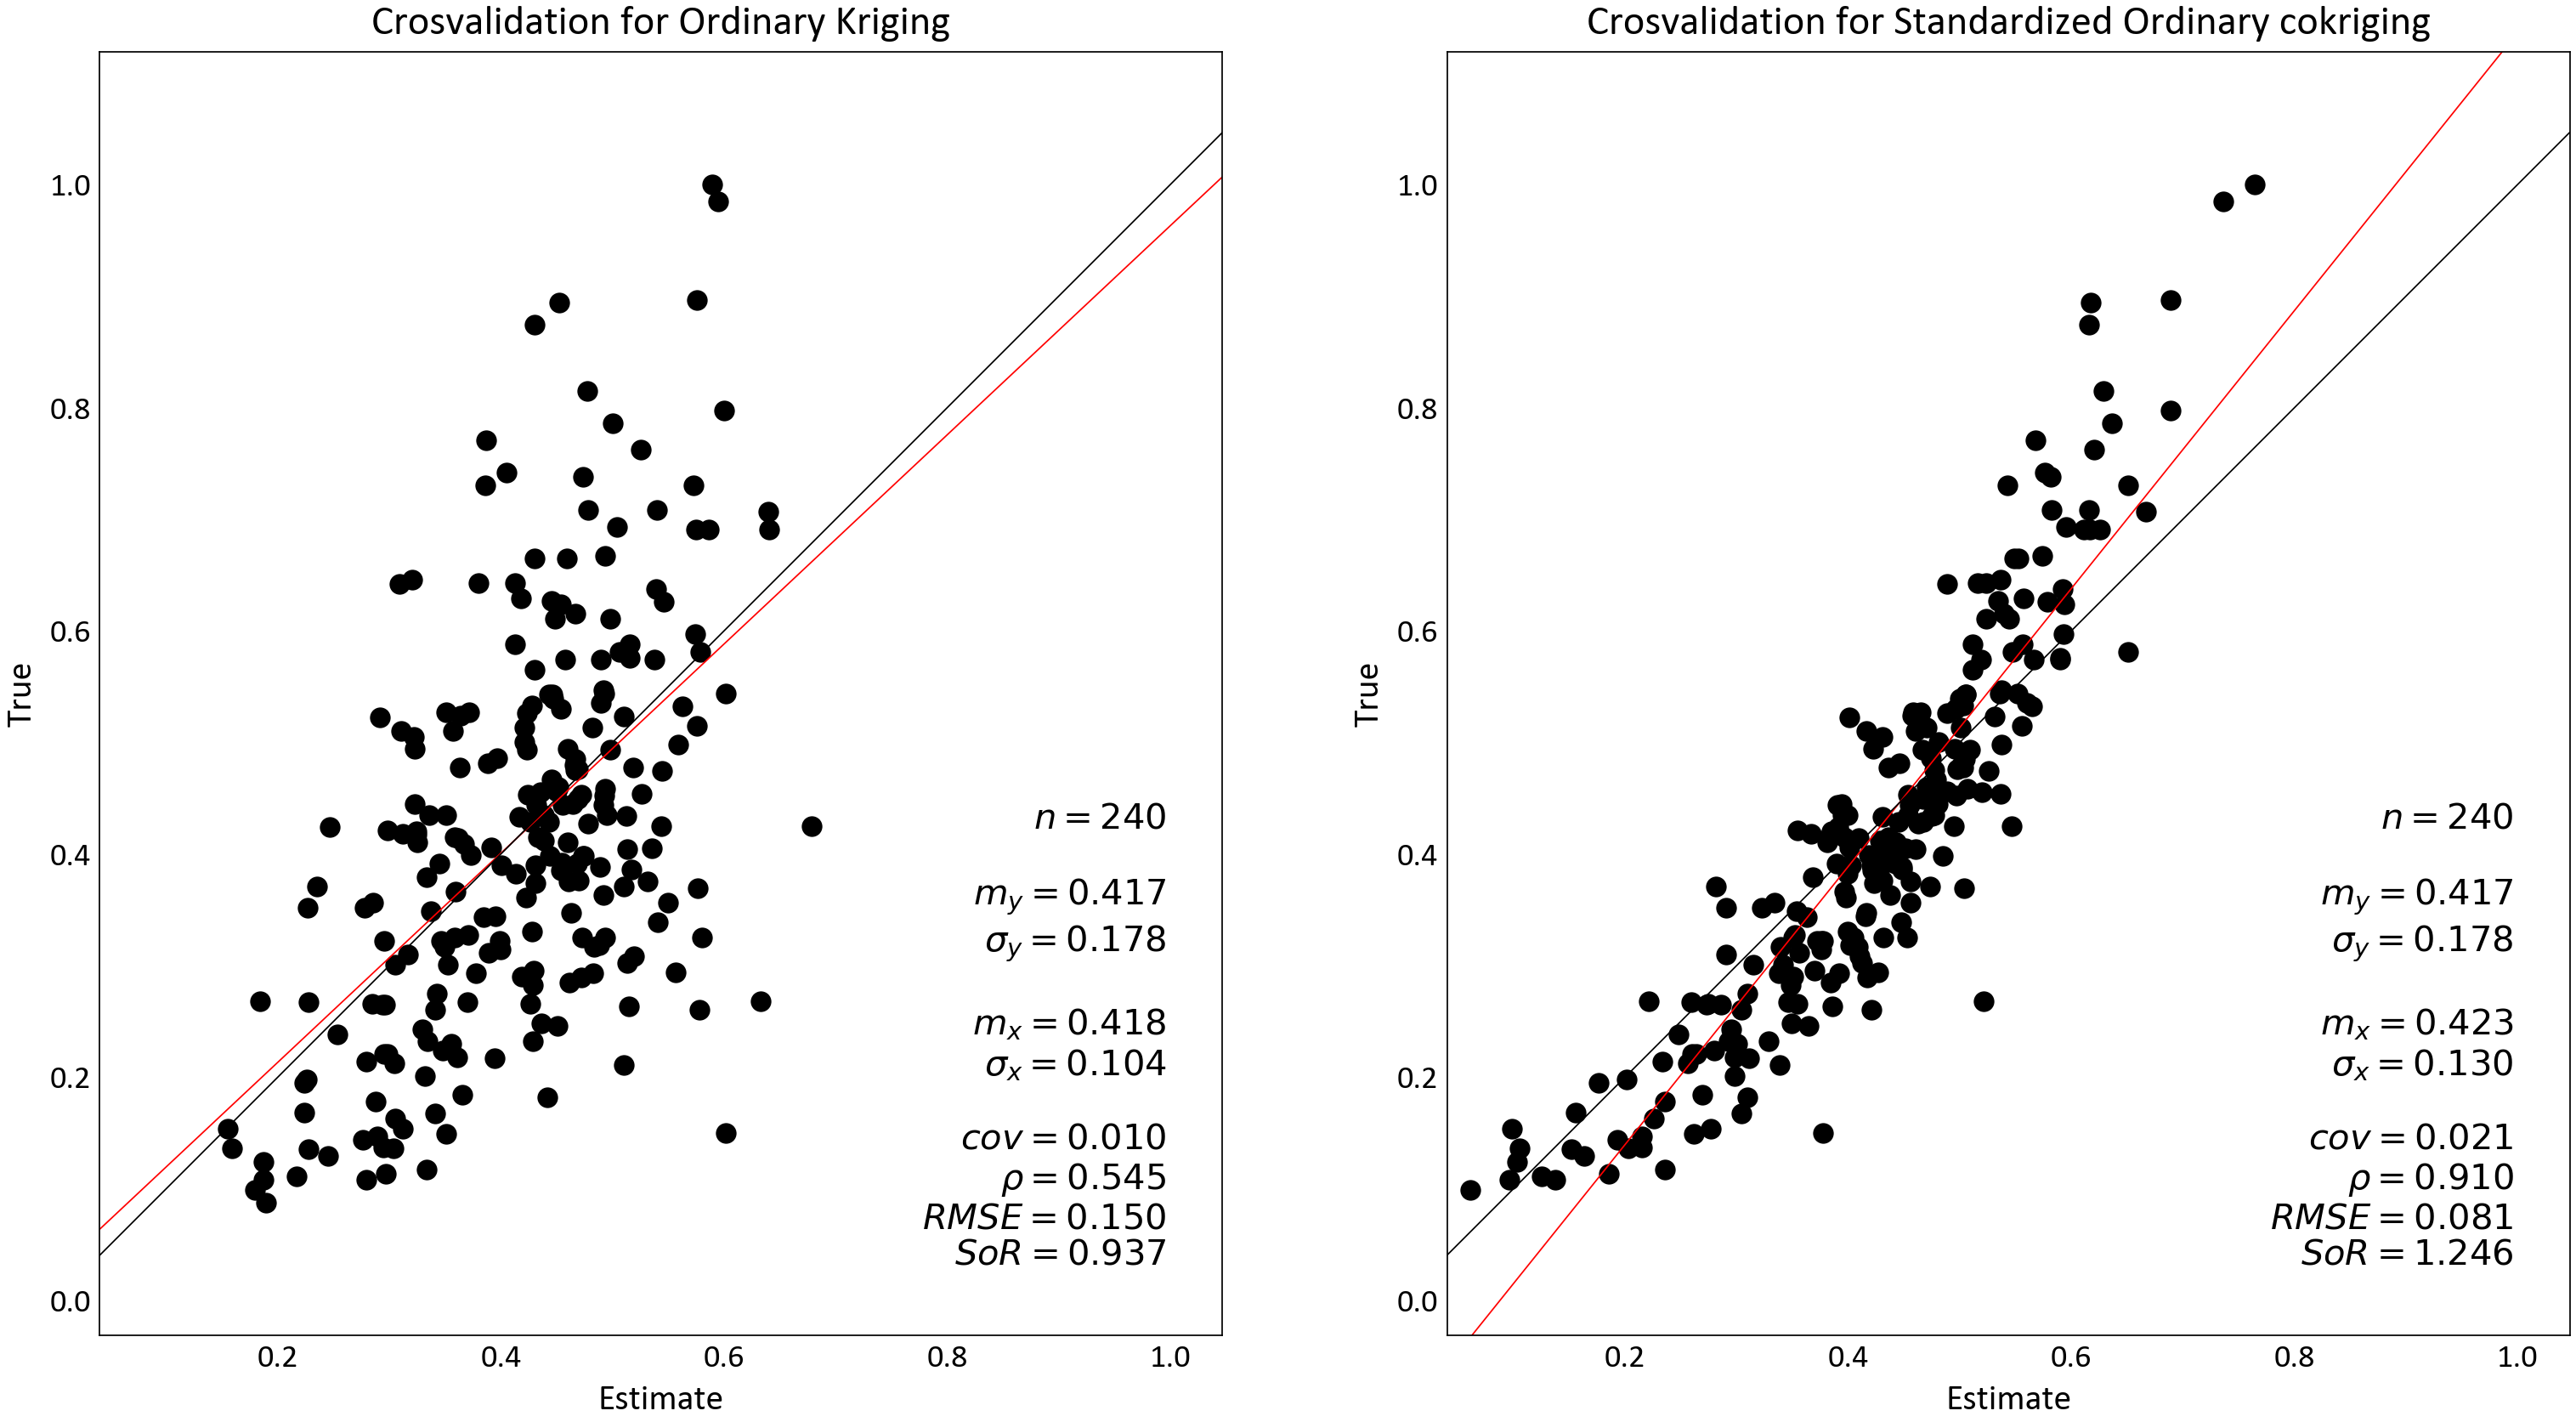 Cross validation between estimates of ordinary kriging (left) and standardized ordinary cokriging (right) compared with the true values of drill hole data.